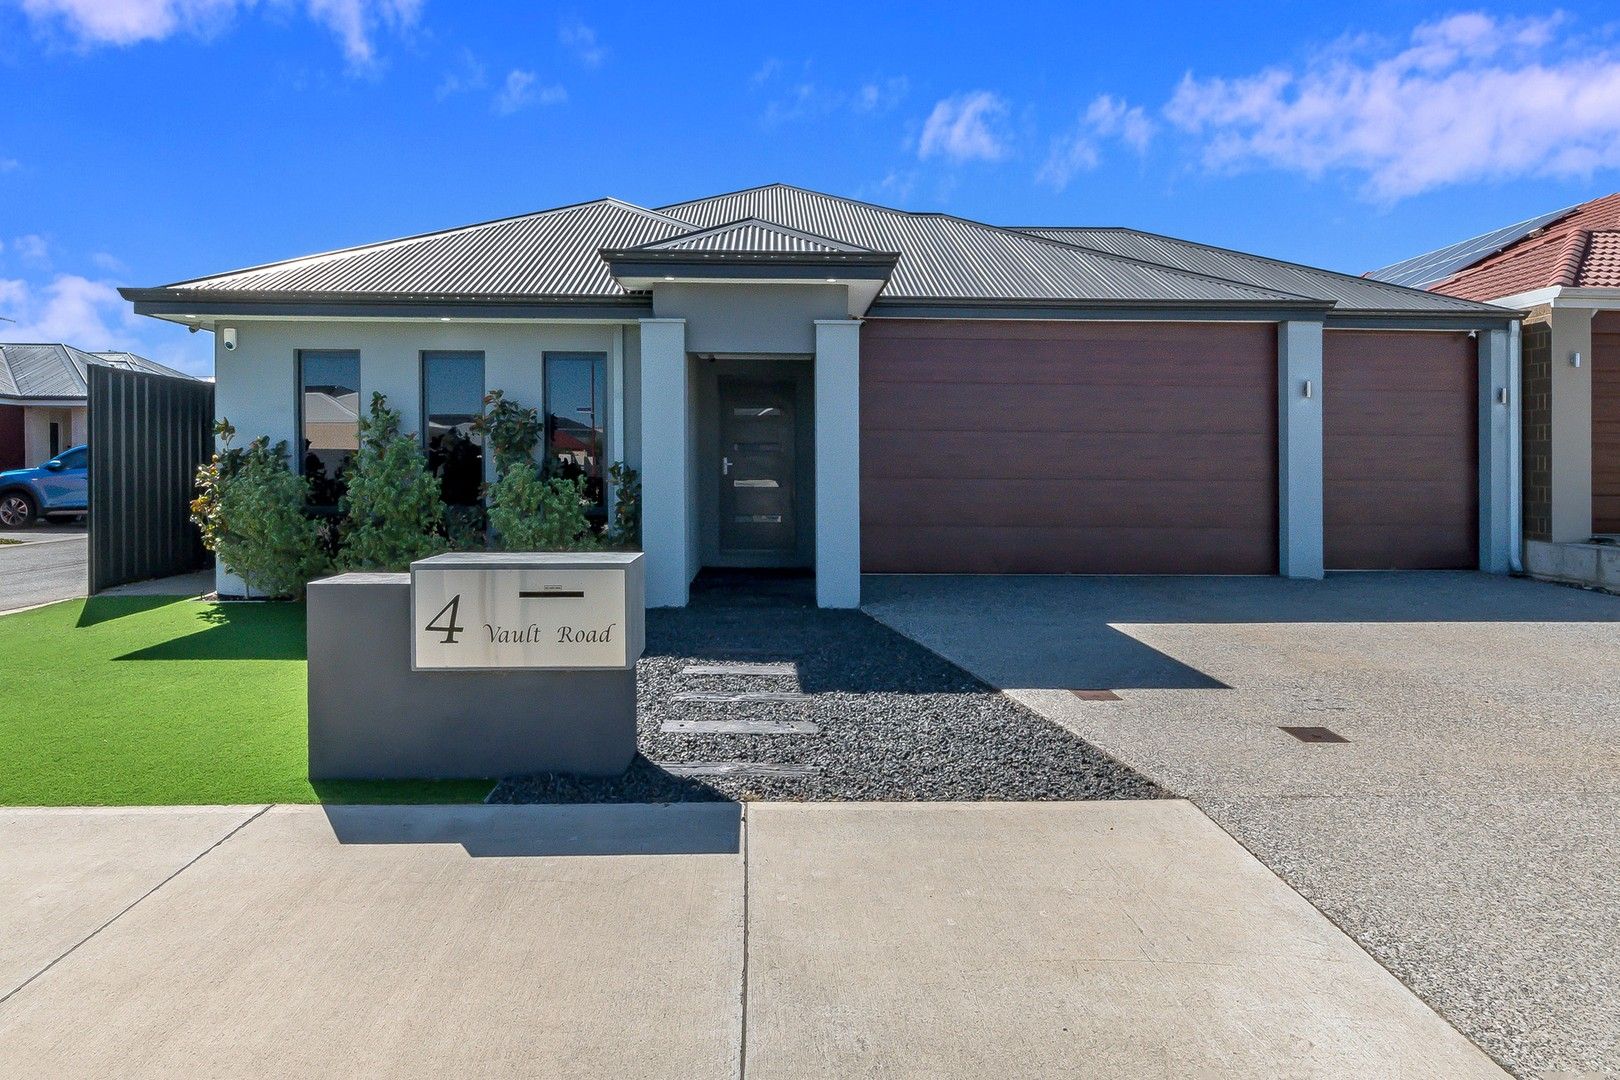 4 bedrooms House in 4 Vault Road SOUTHERN RIVER WA, 6110